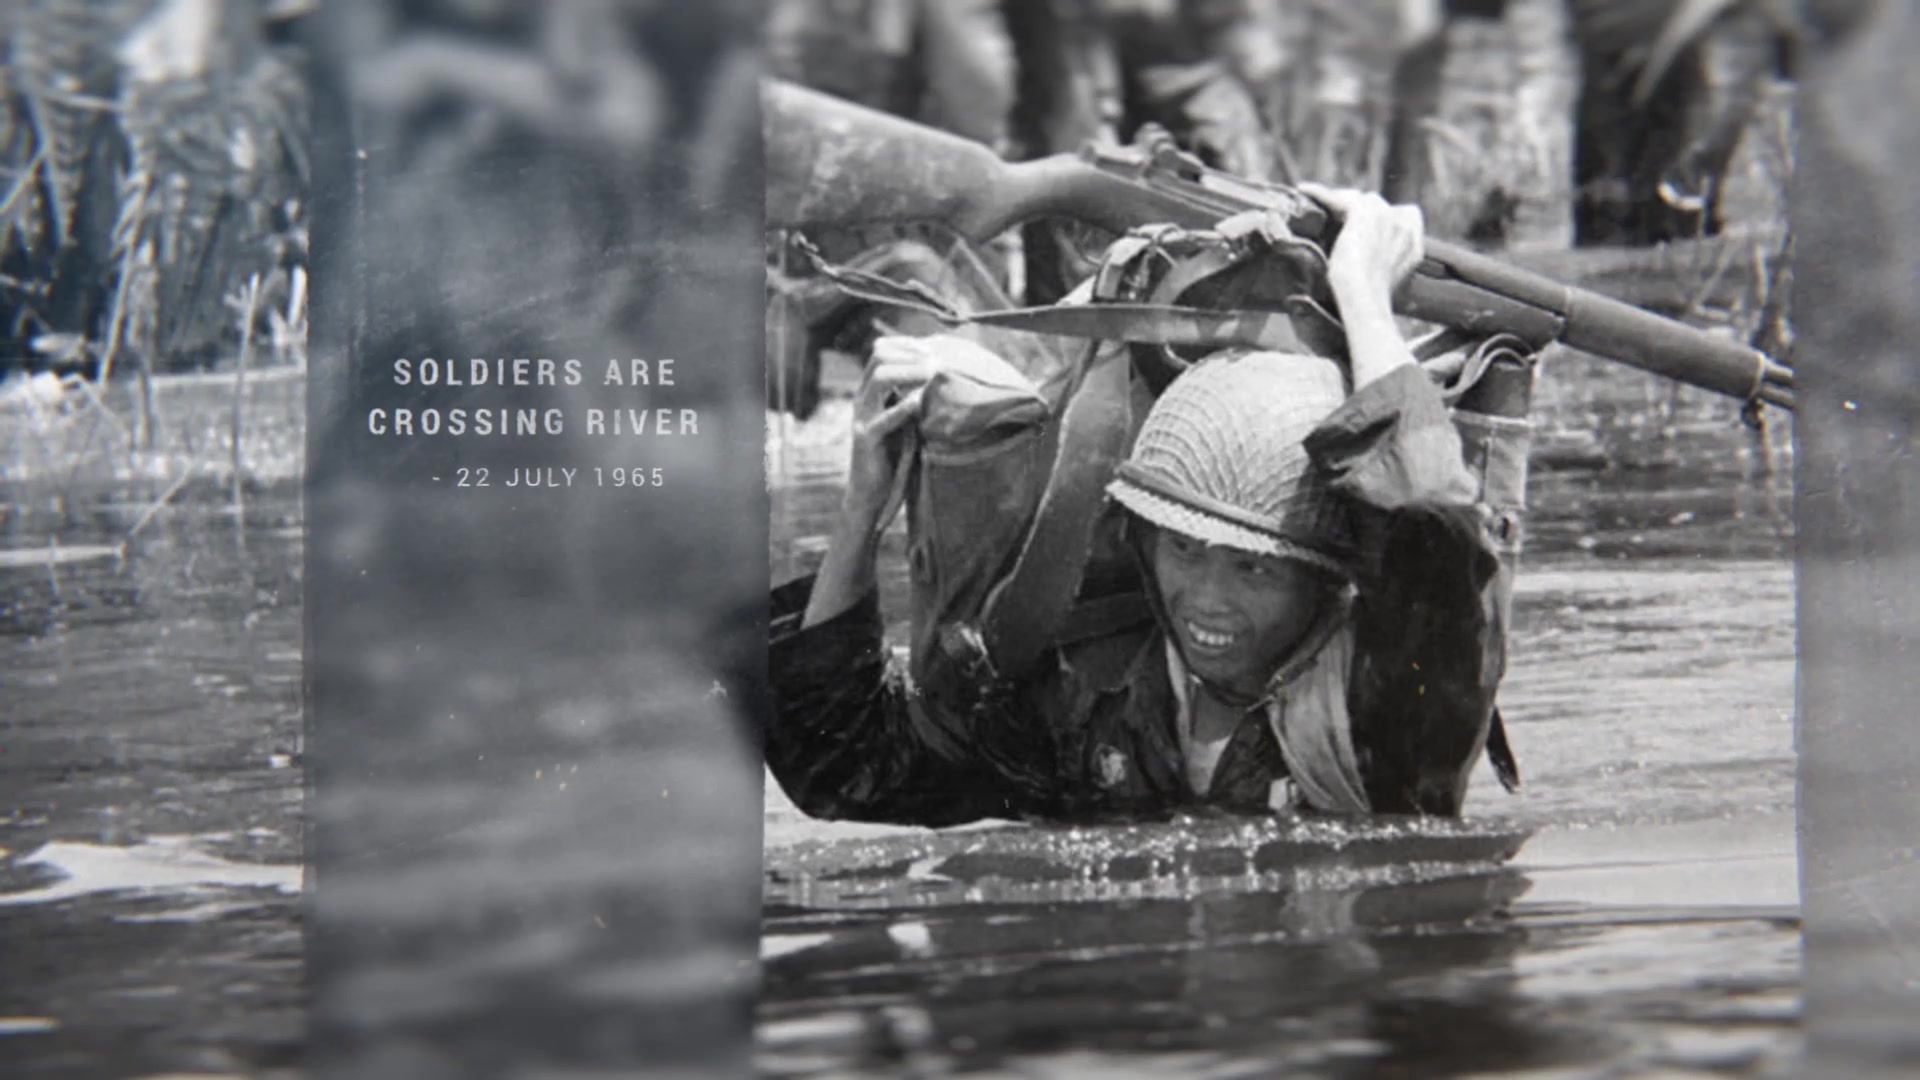 The History One - Download Videohive 22642458